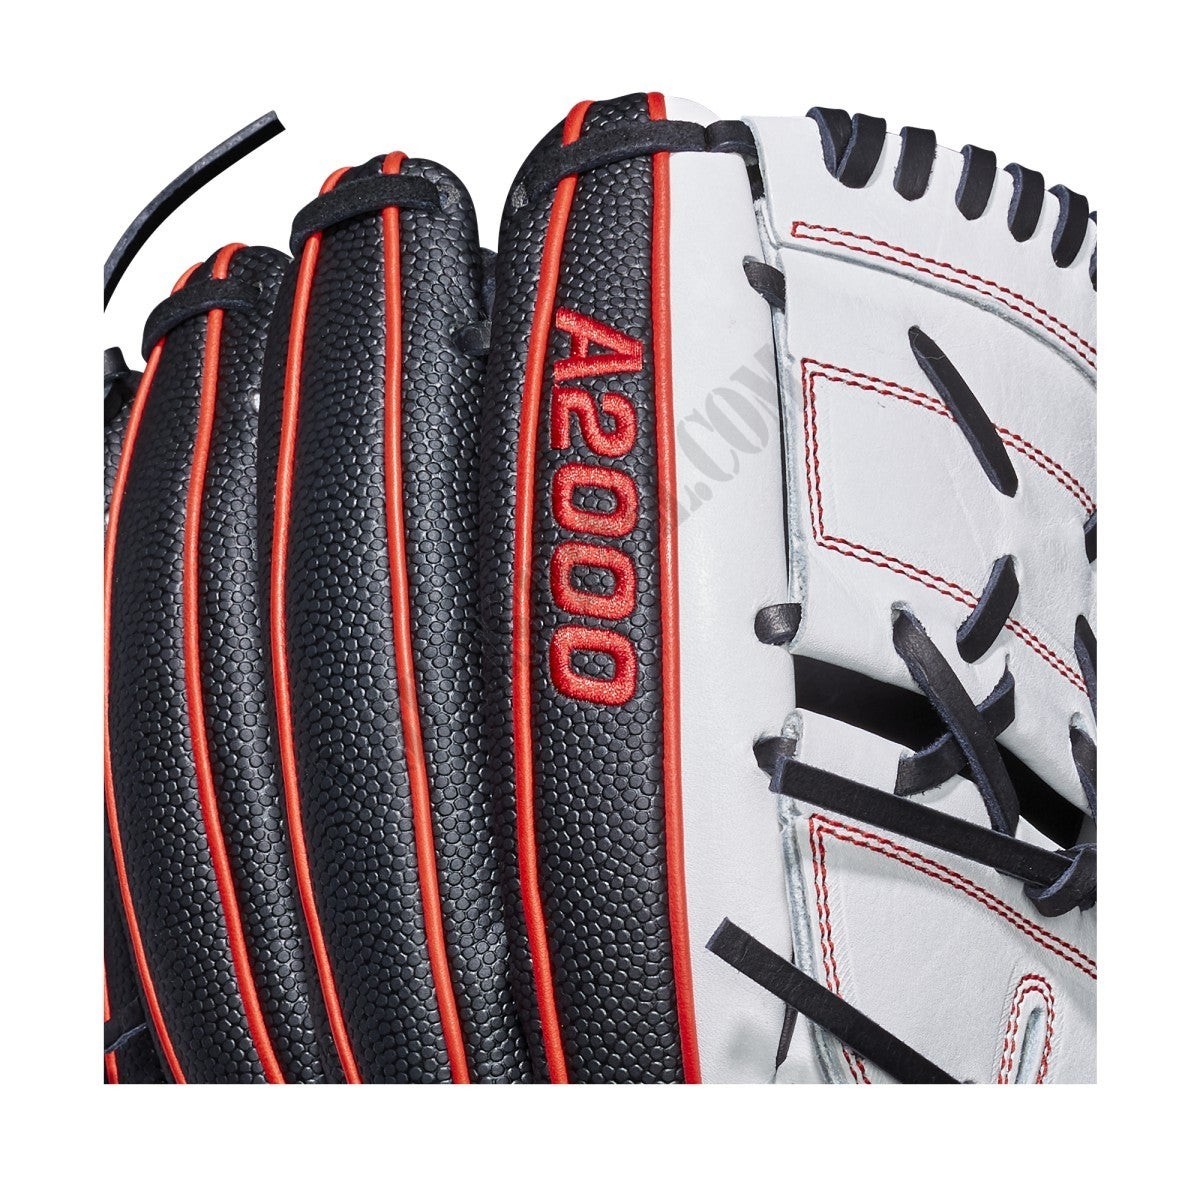 2019 A2000 MA14 GM 12.25" Pitcher's Fastpitch Glove ● Wilson Promotions - -6